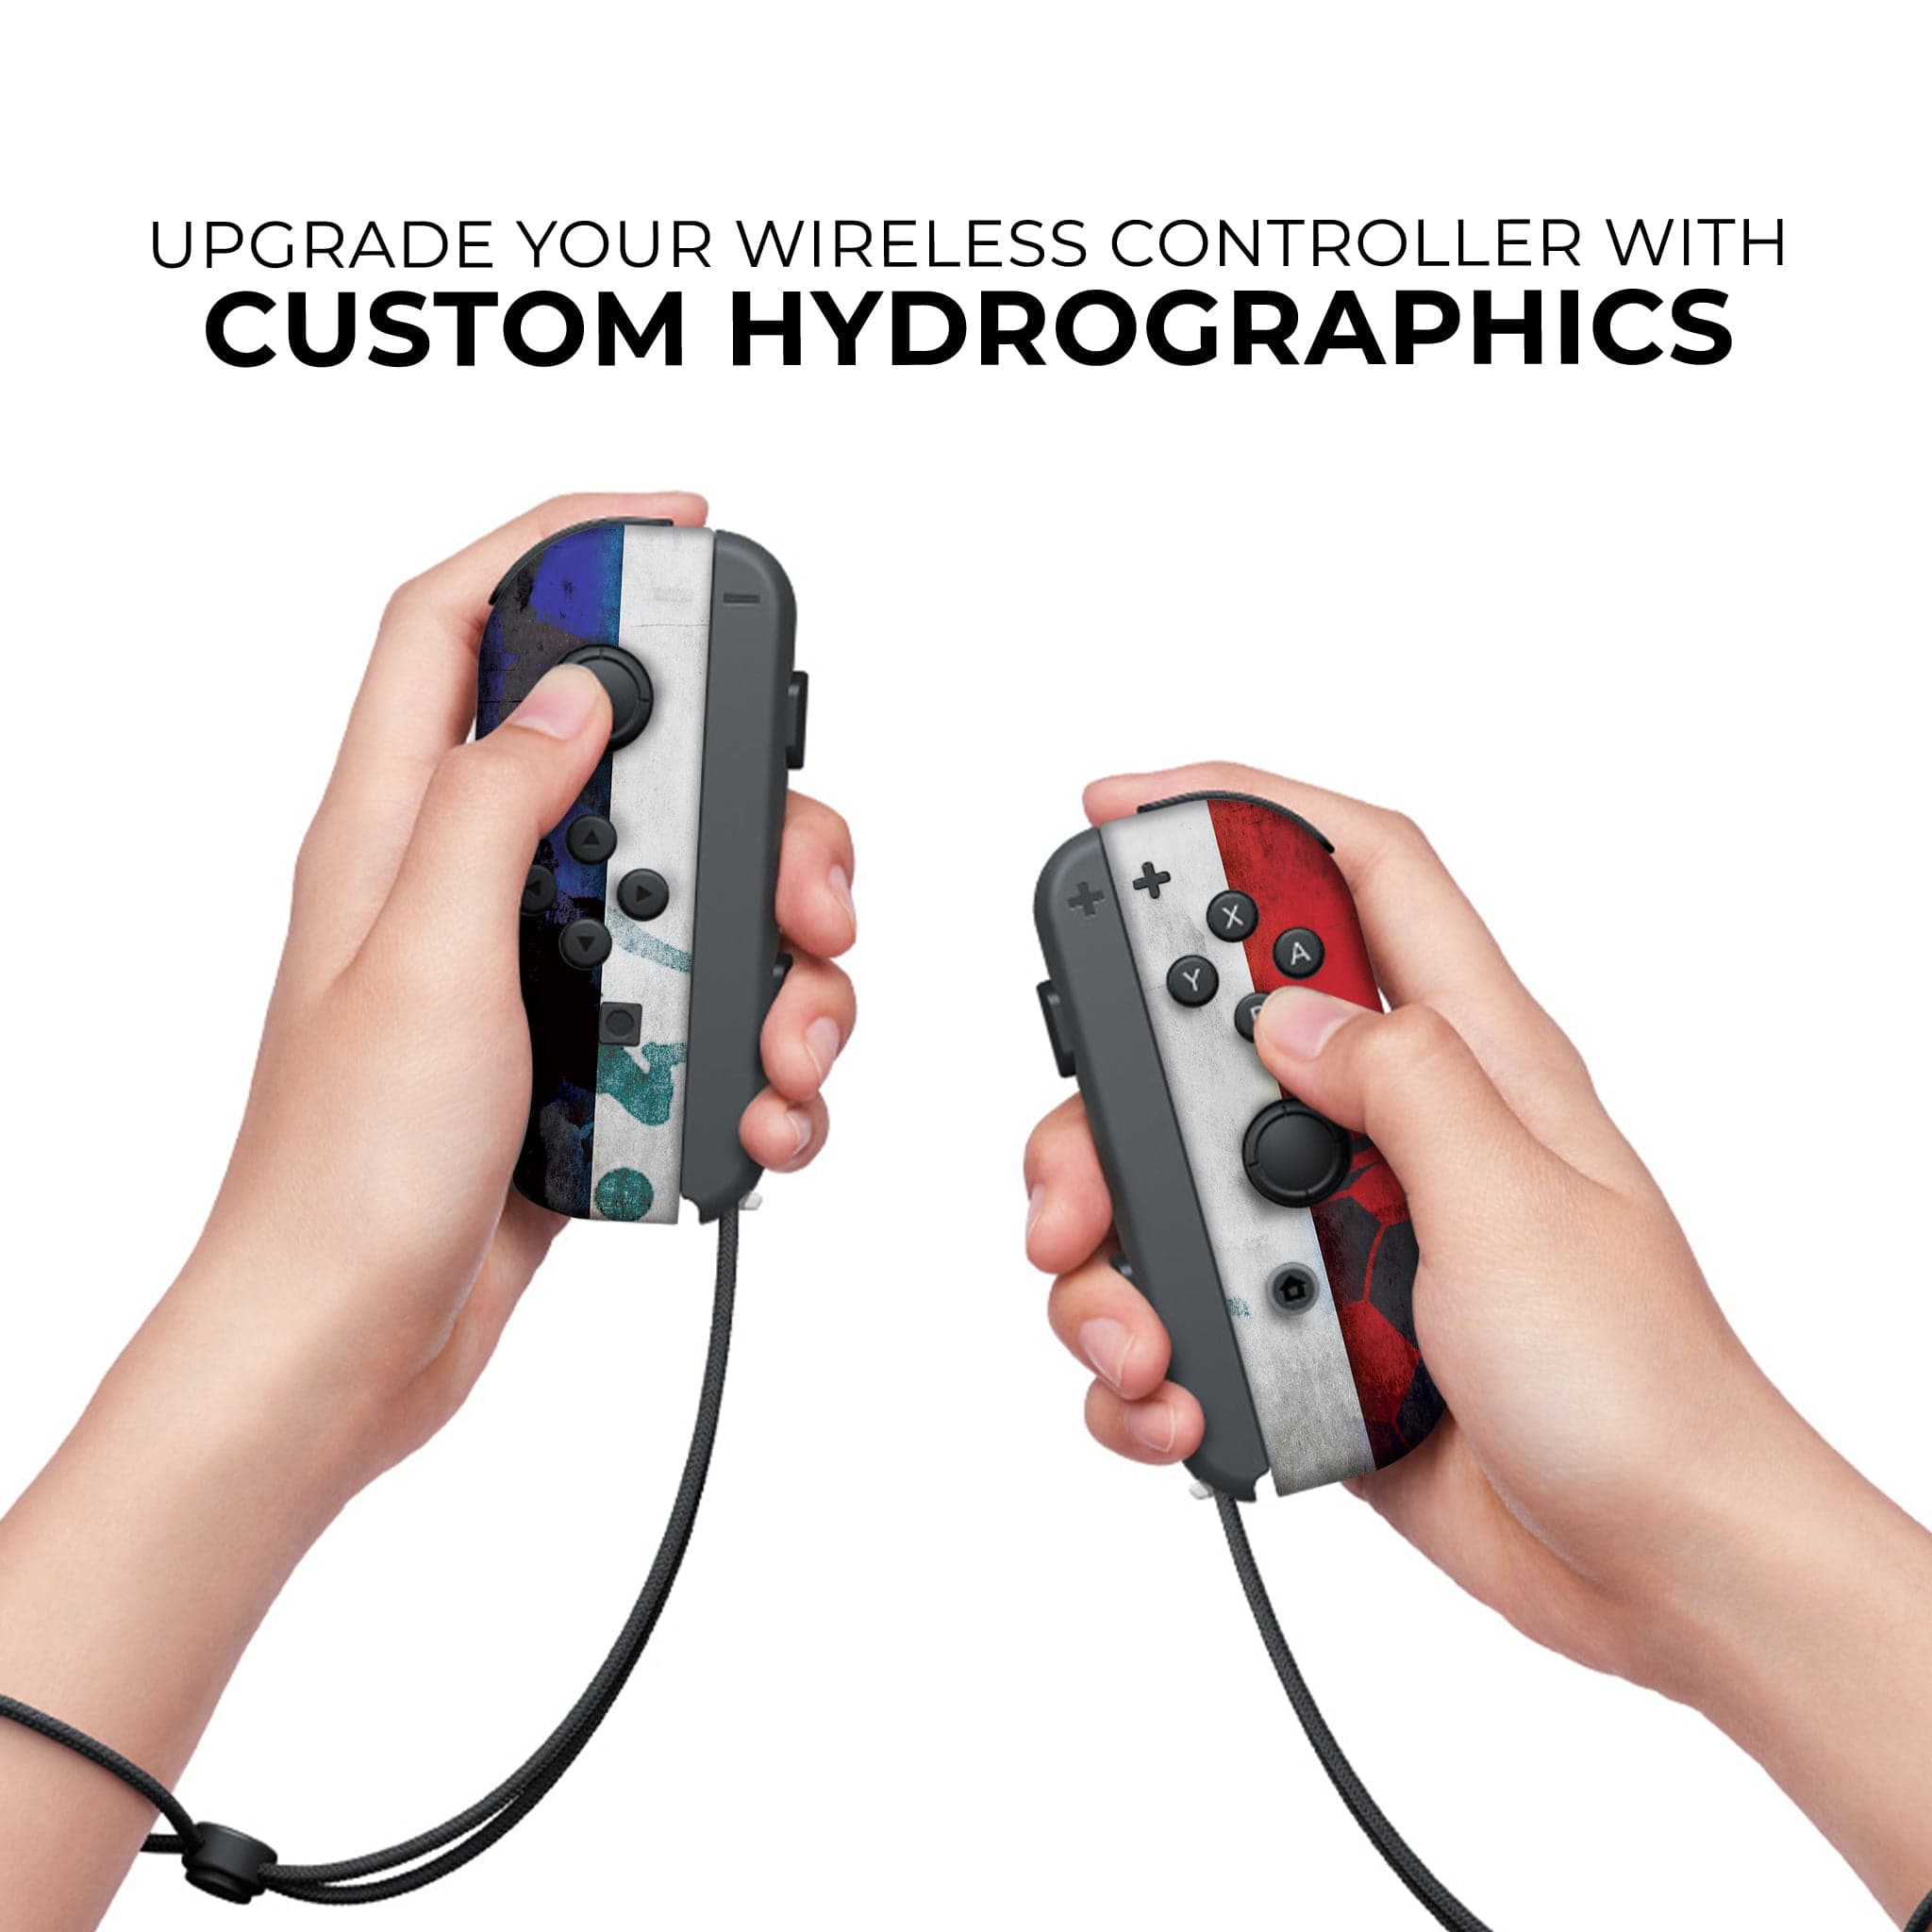 France Inspired Nintendo Switch Joy-Con Left and Right Switch Controllers by Nintendo